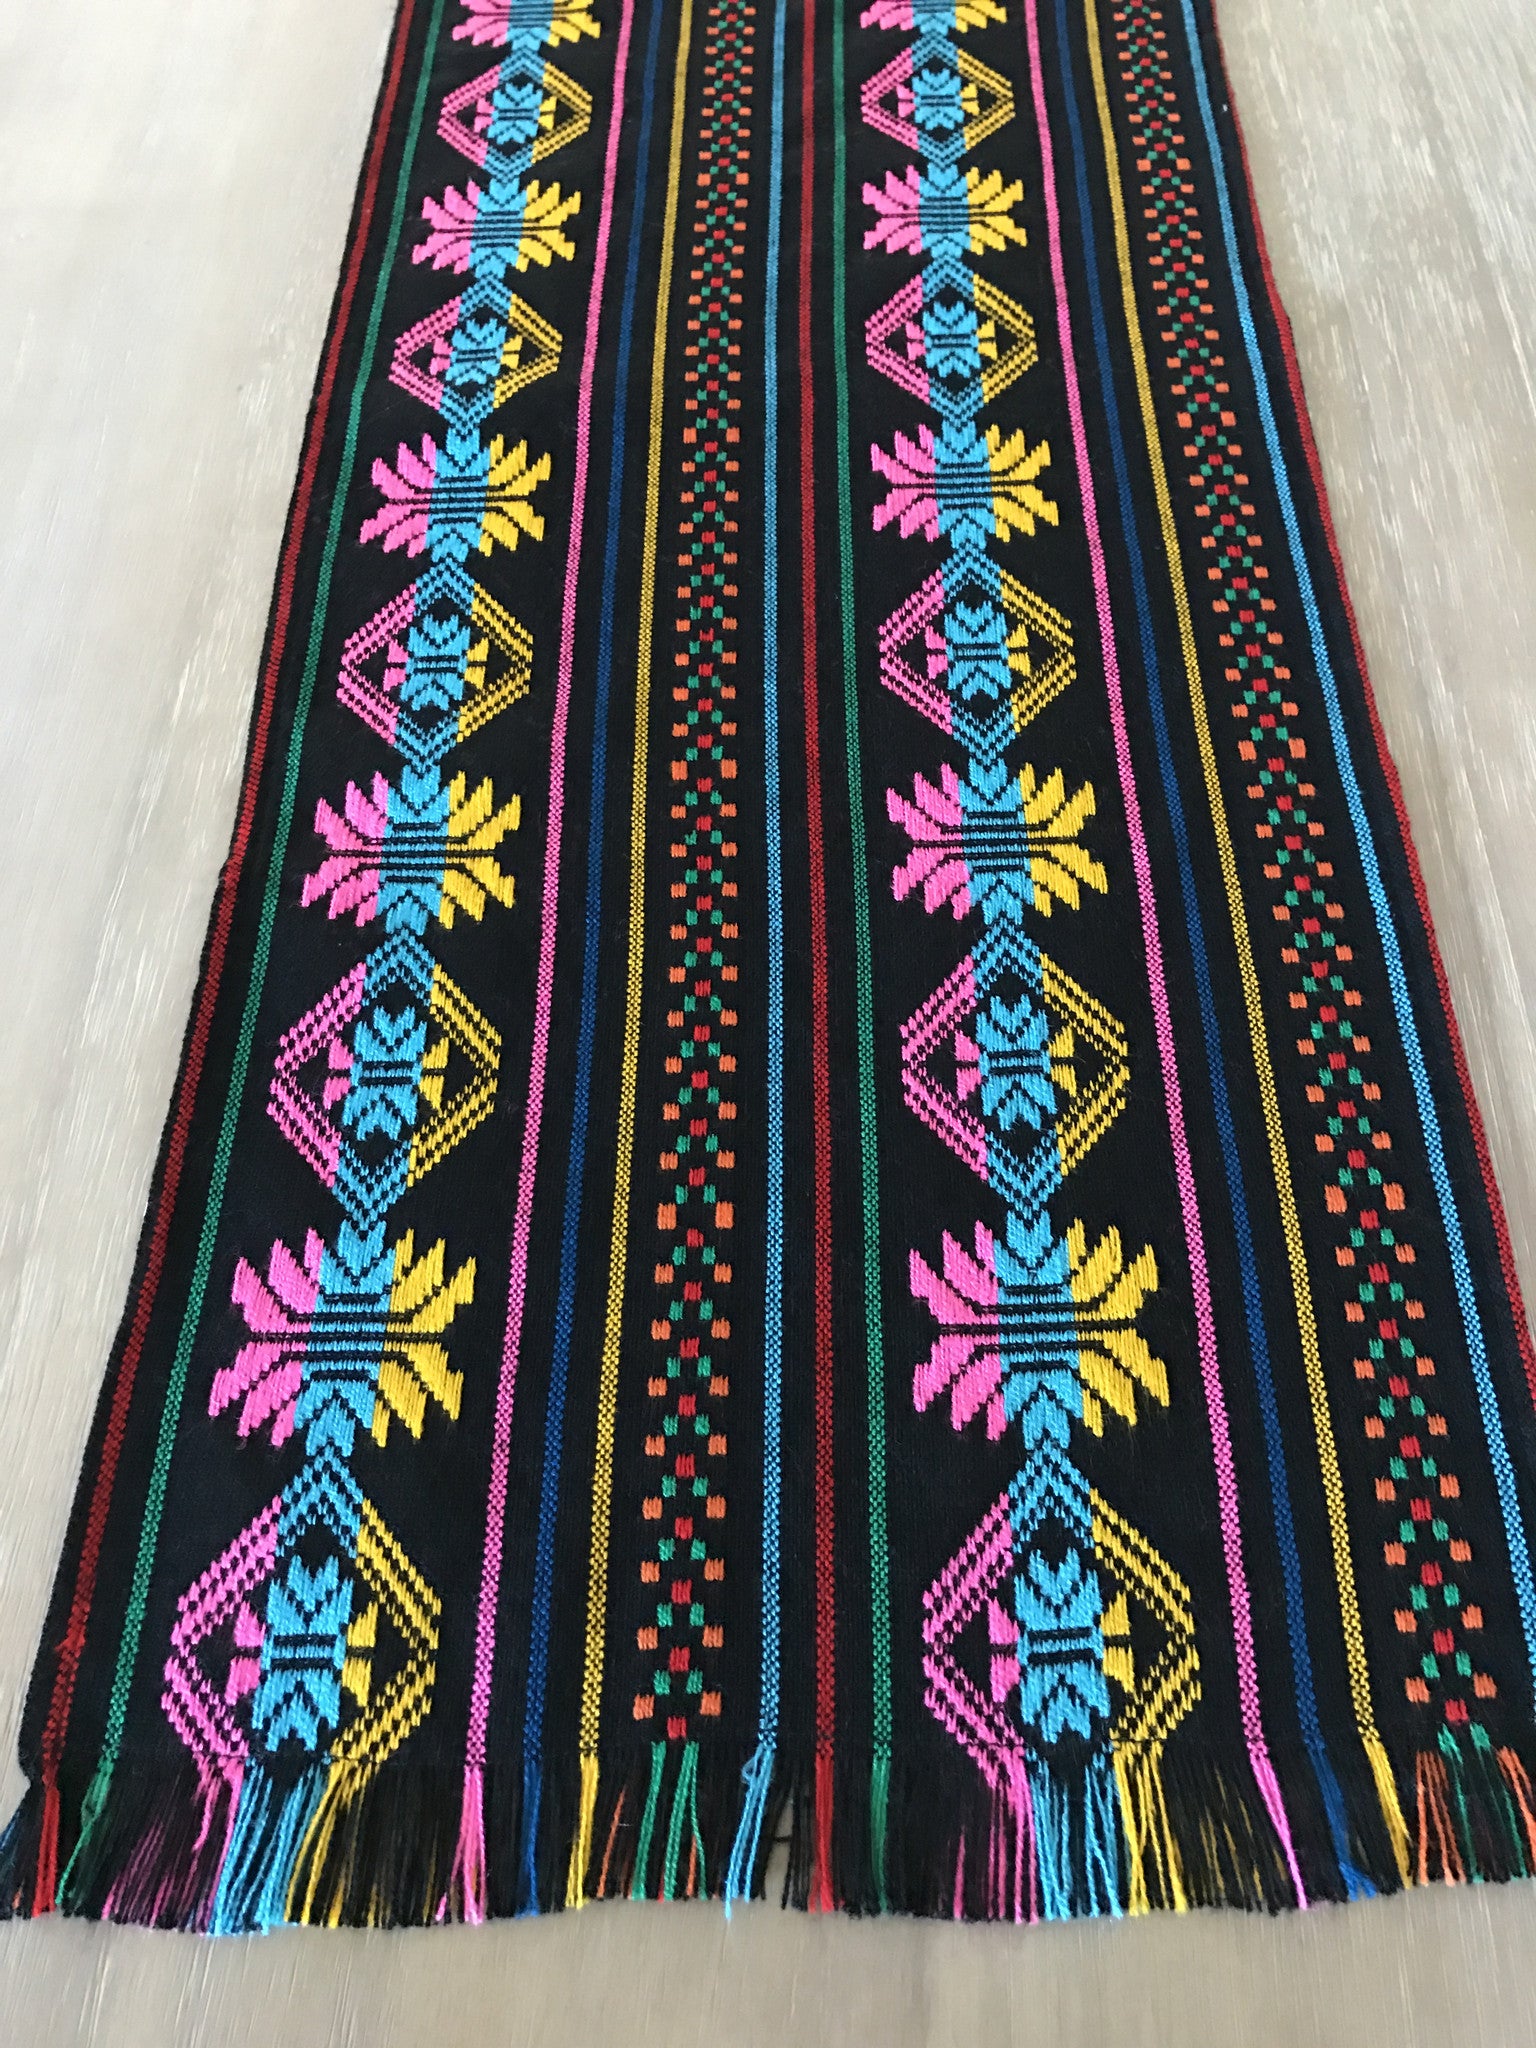 Mexican Table Runner Woven Colorful black design - MesaChic - 1